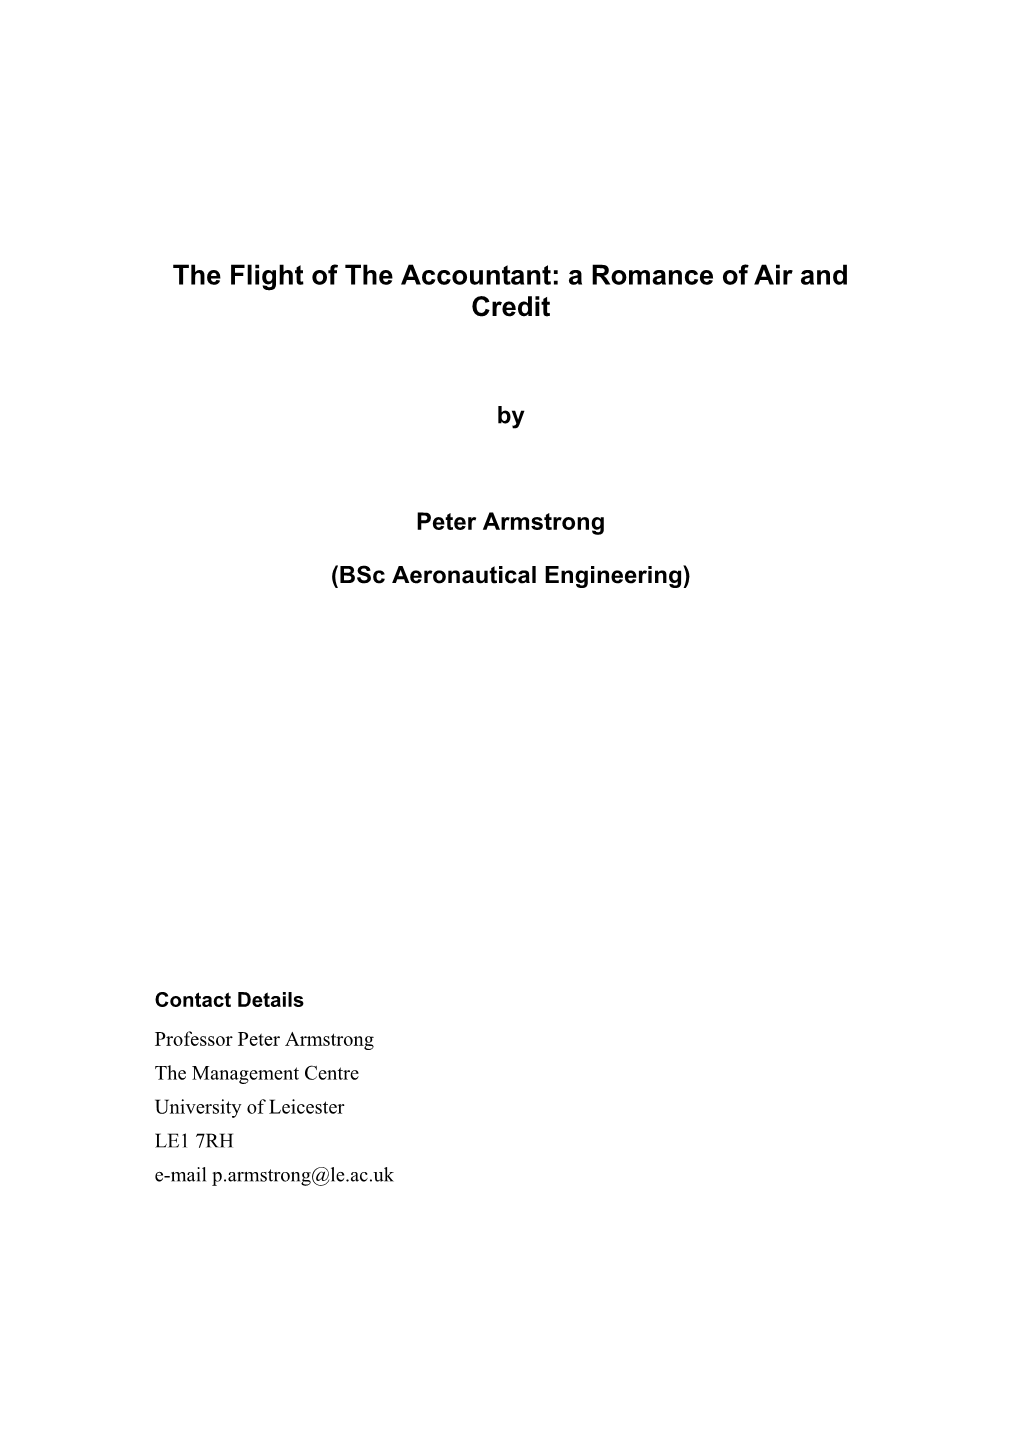 The Flight of the Accountant: a Romance of Air and Credit